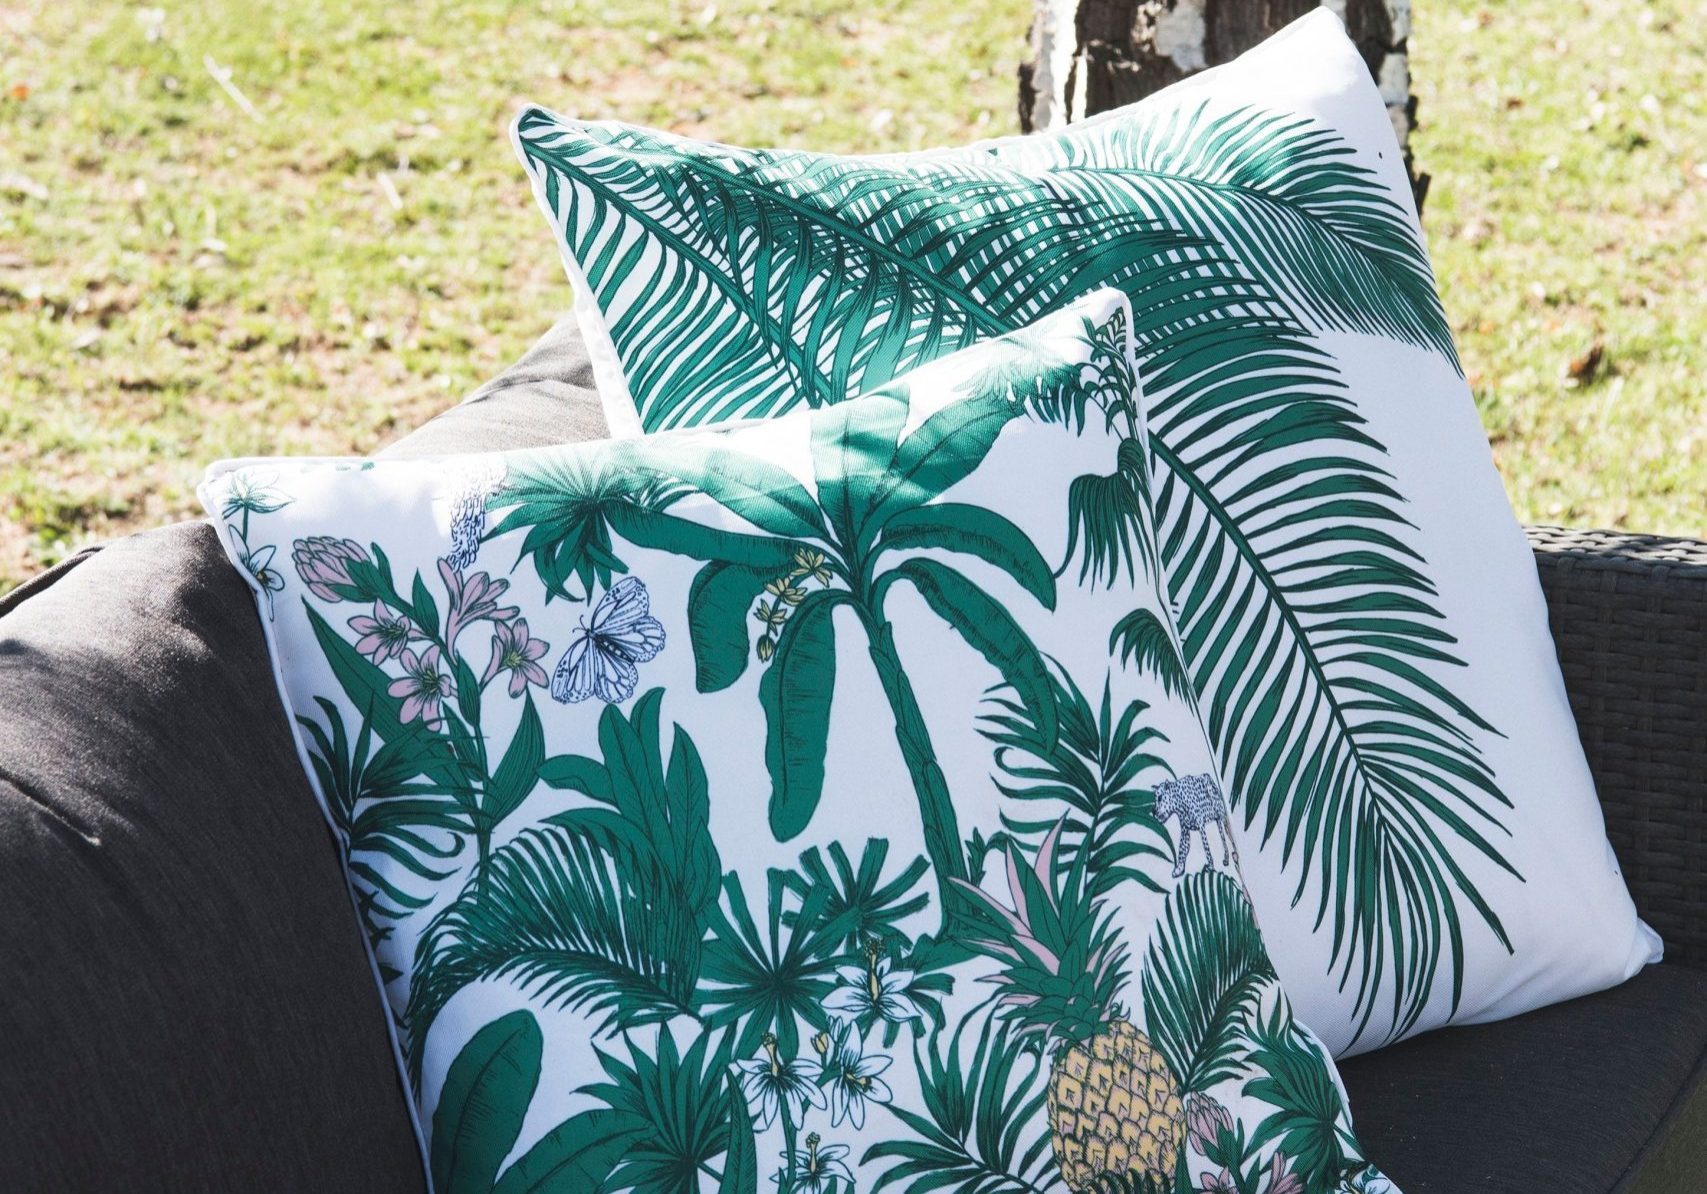 Two decorative throw pillows with green tropical leaf patterns are placed on a grey outdoor wicker sofa, situated next to a tree trunk and grassy lawn.